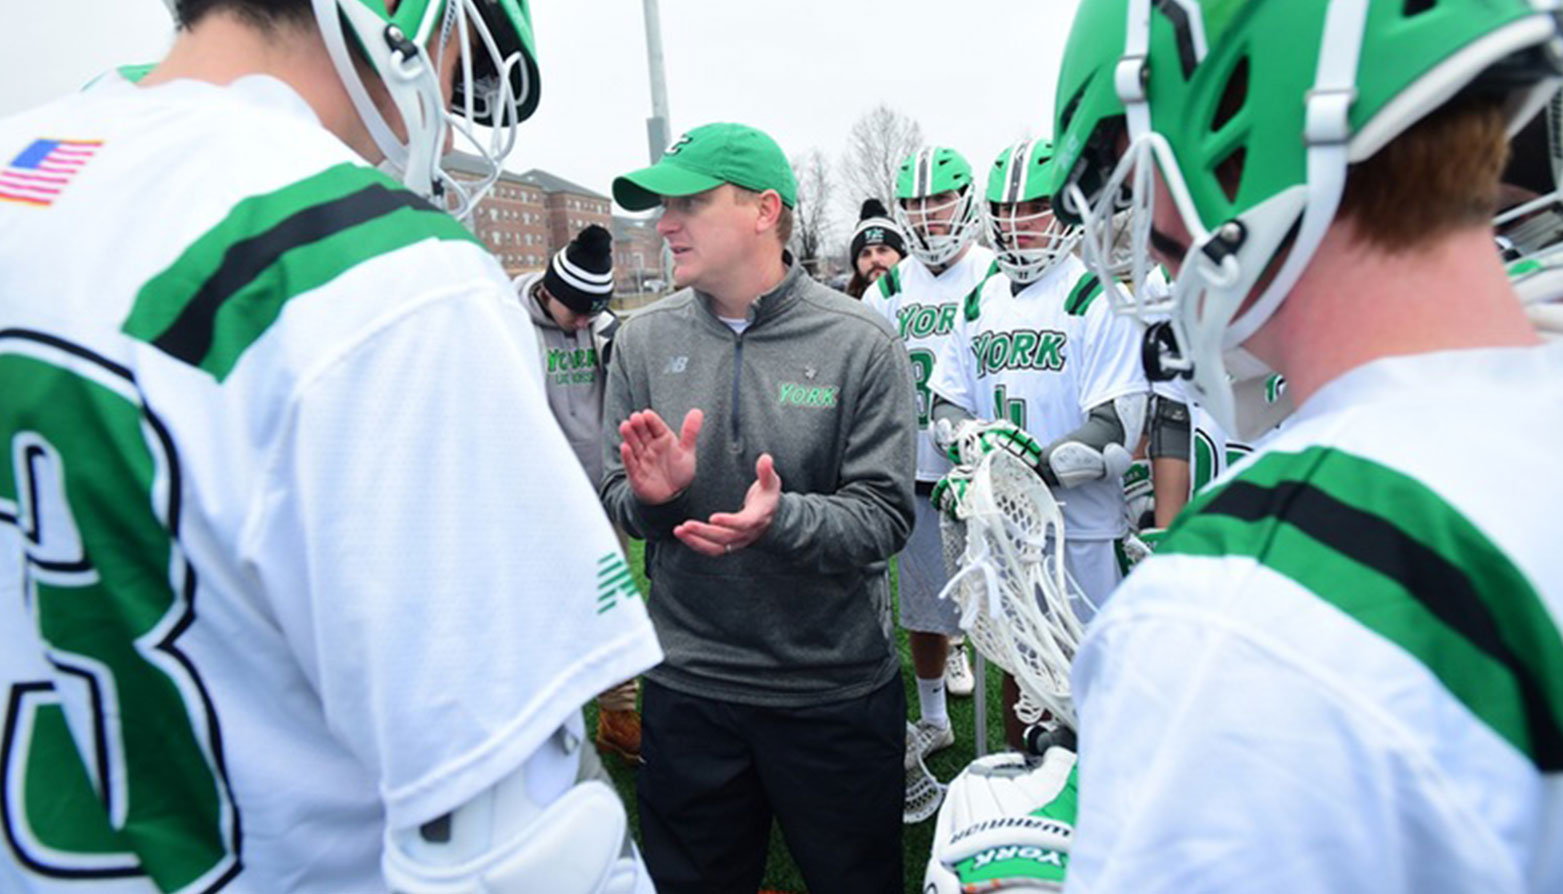 York's Brandon Childs Named 2018 USILA Division III Coach of the Year